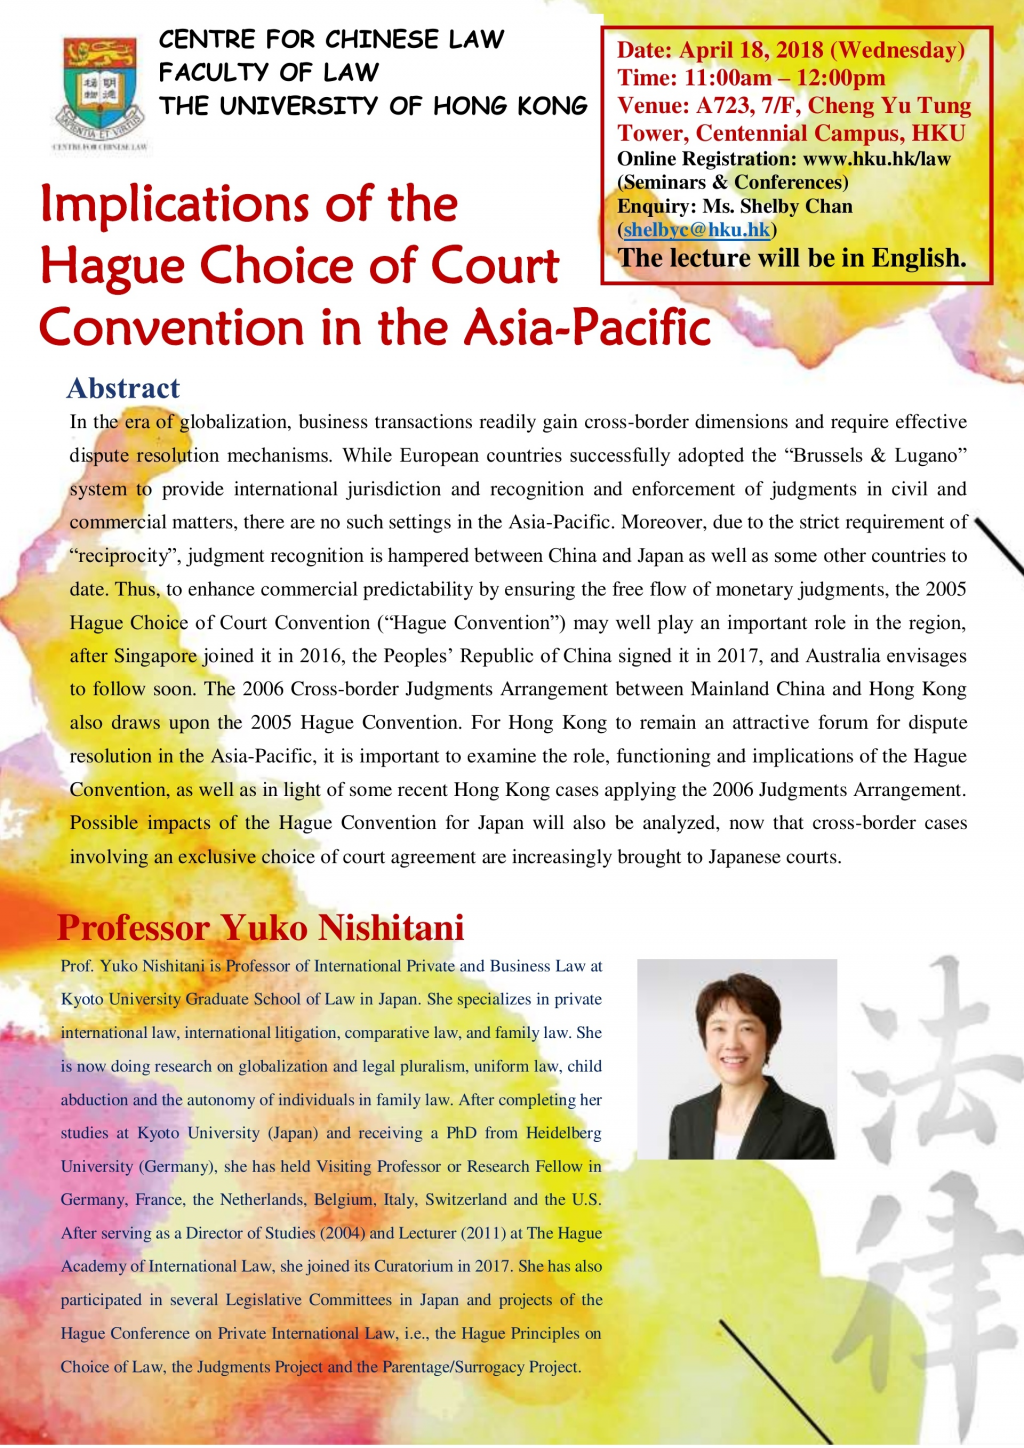 Implications of the Hague Choice of Court Convention in the Asia-Pacific